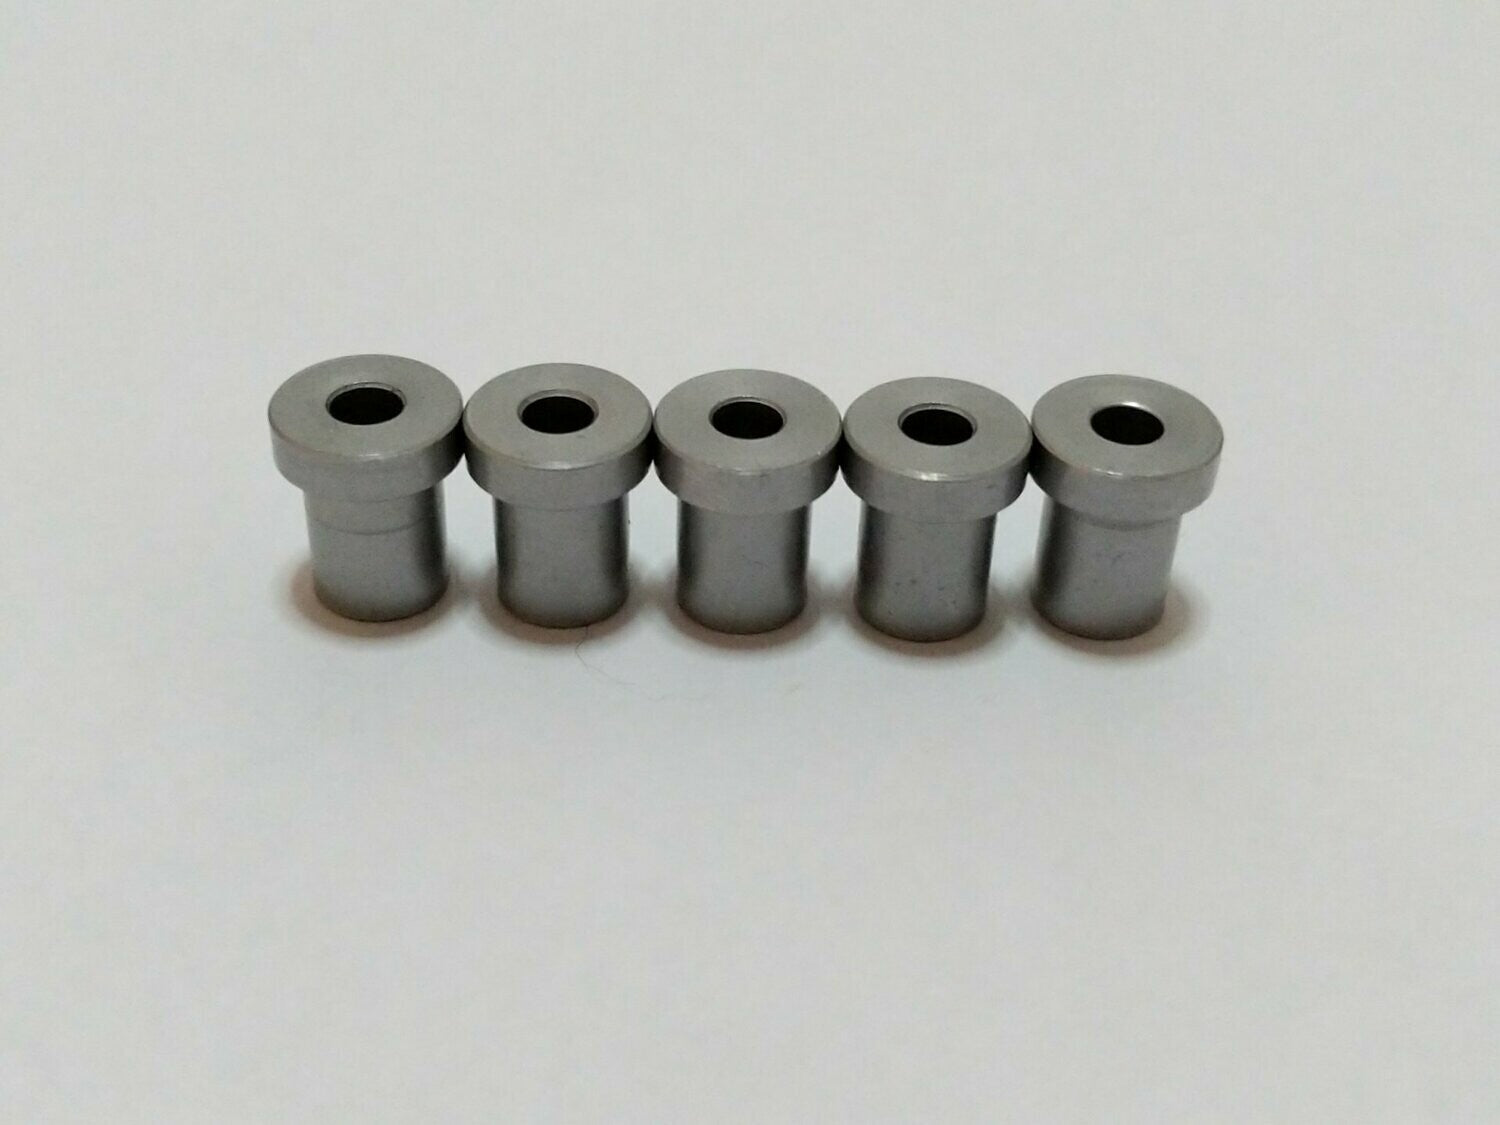 Thrifty Press-Fit Drill Bushings